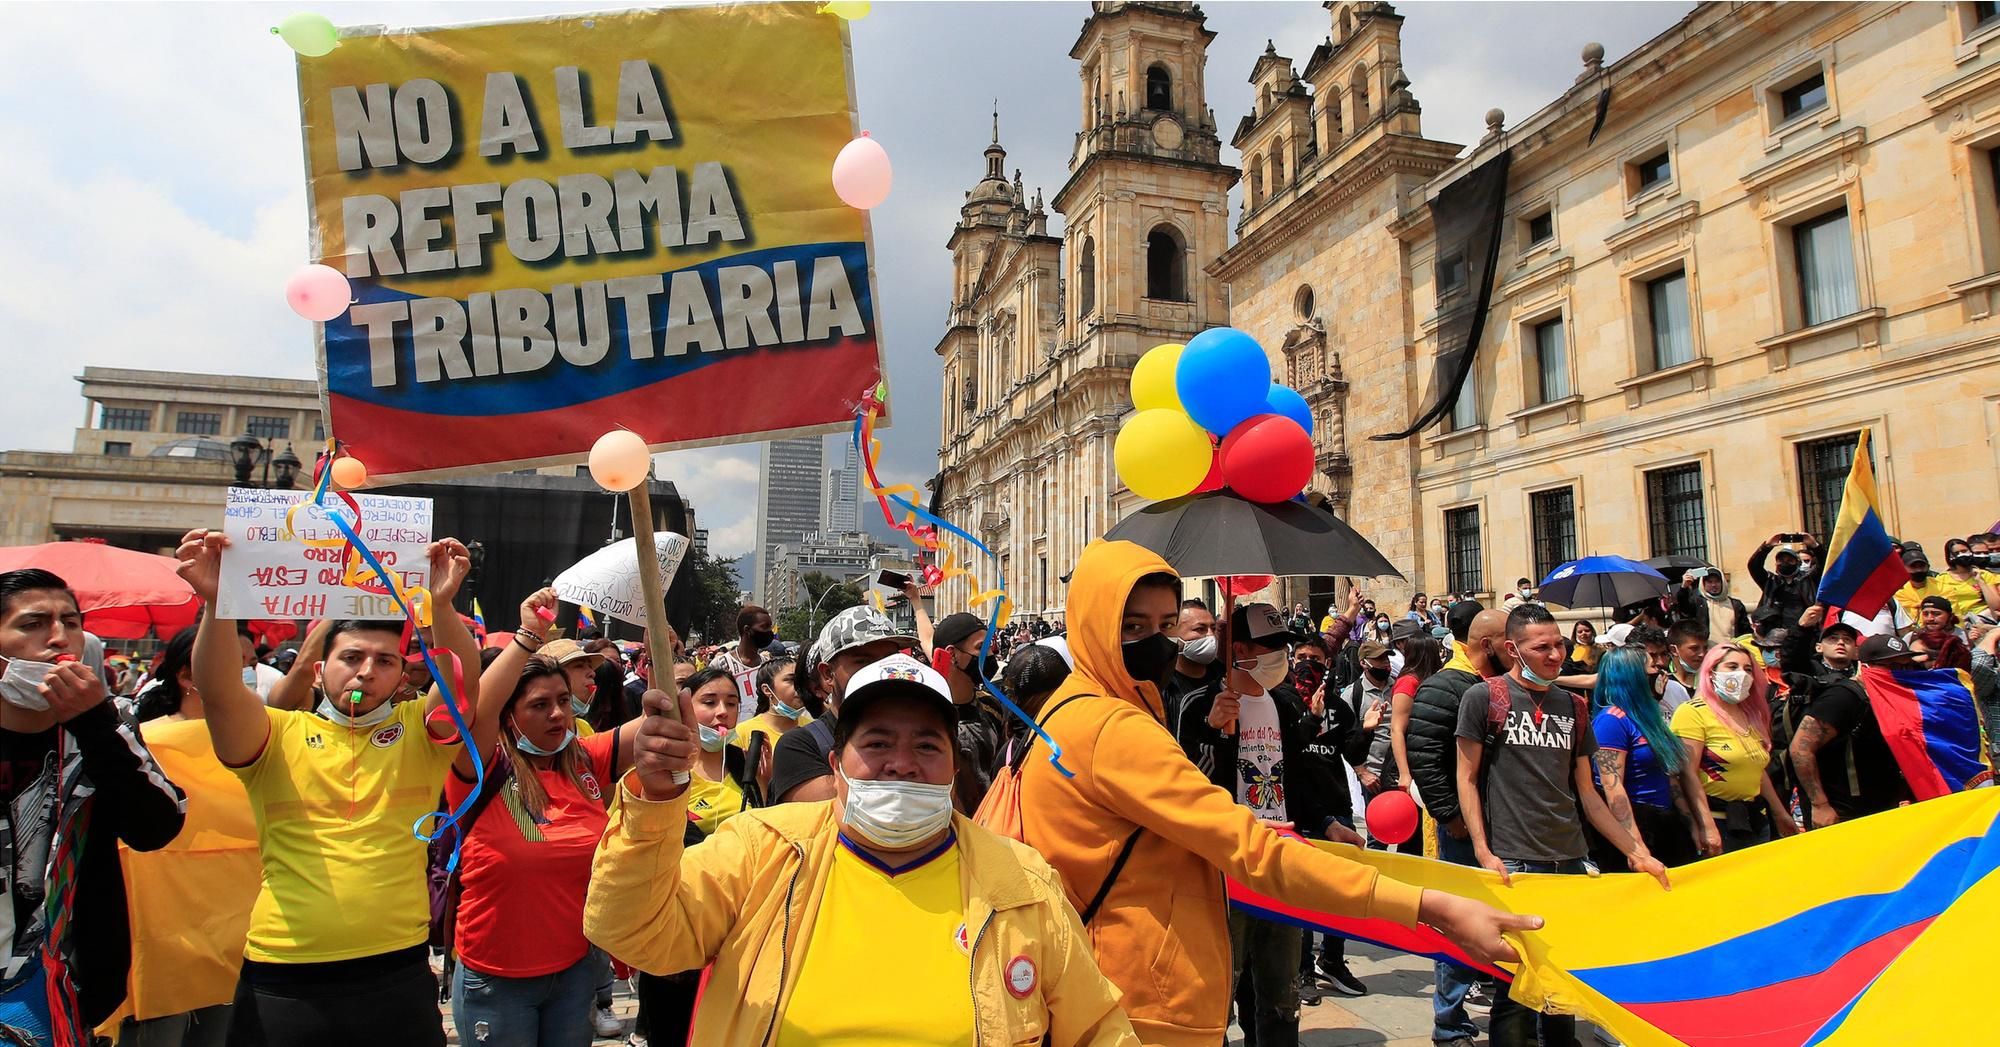 Colombian demonstrators—one holding a sign saying "No to Tax Reform"—gathered in Bogotá's Bolívar Square on May 1, 2021 to protest panned tax reform and other issues. (Photo: Daniel Munoz/AFP via Getty Images)